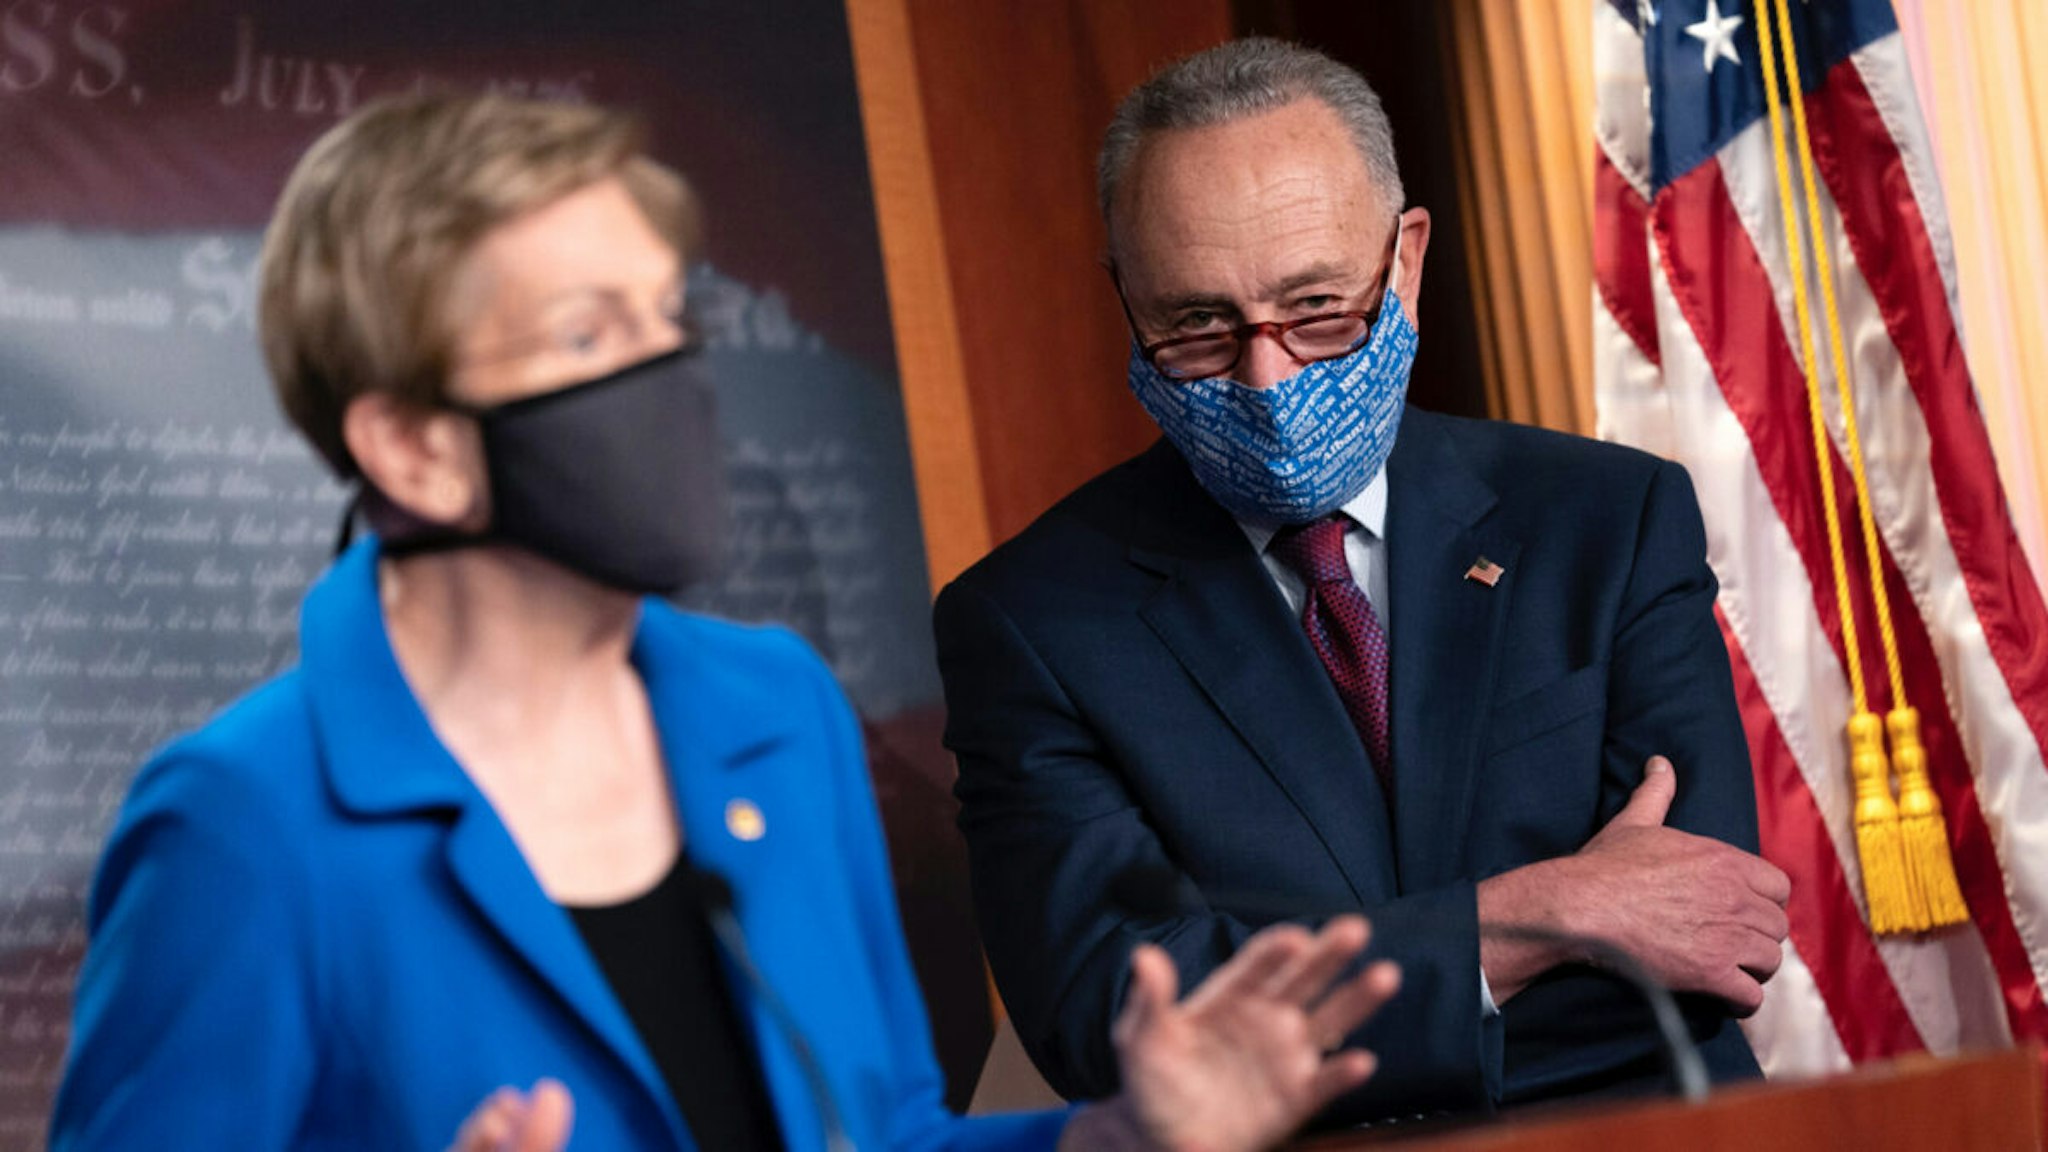 Senate Minority Leader Chuck Schumer (D-NY) (R) listens as U.S. Sen. Elizabeth Warren (D-MA) speaks during a news conference on Capitol Hill on October 20, 2020 in Washington, DC.